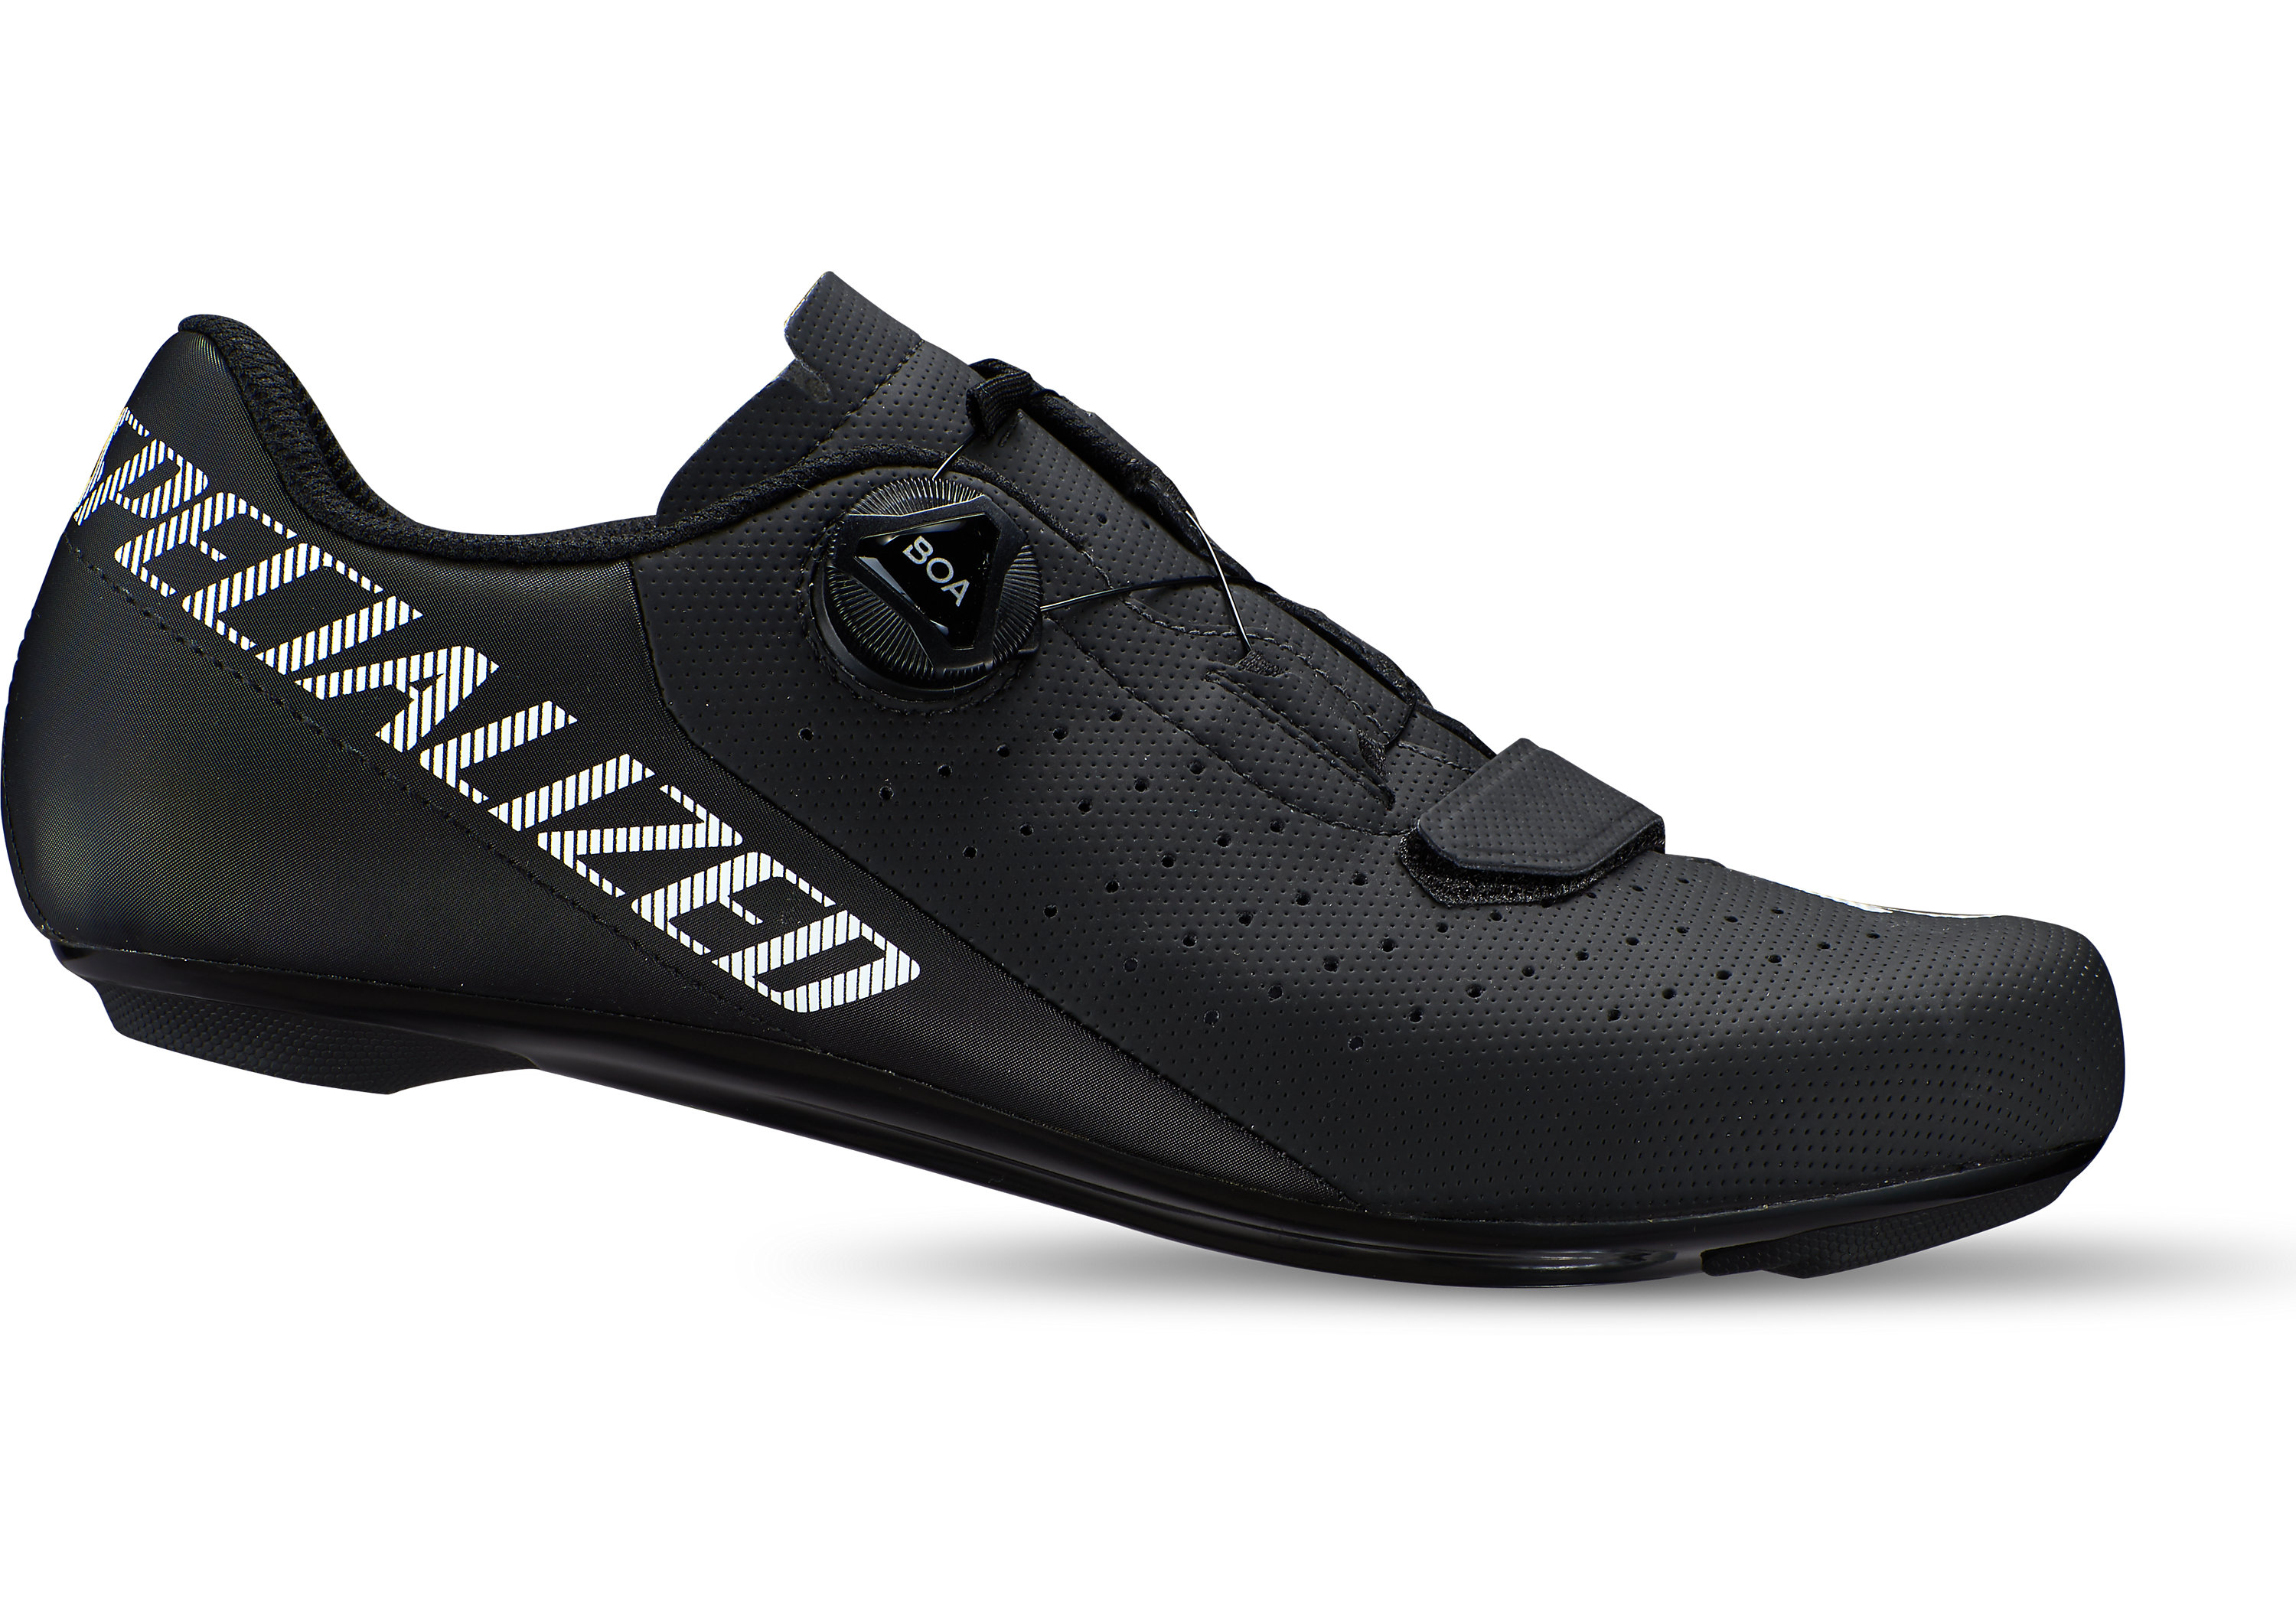 Велообувь Specialized TORCH 1.0 RD SHOE BLK 43 2020 61020-5143